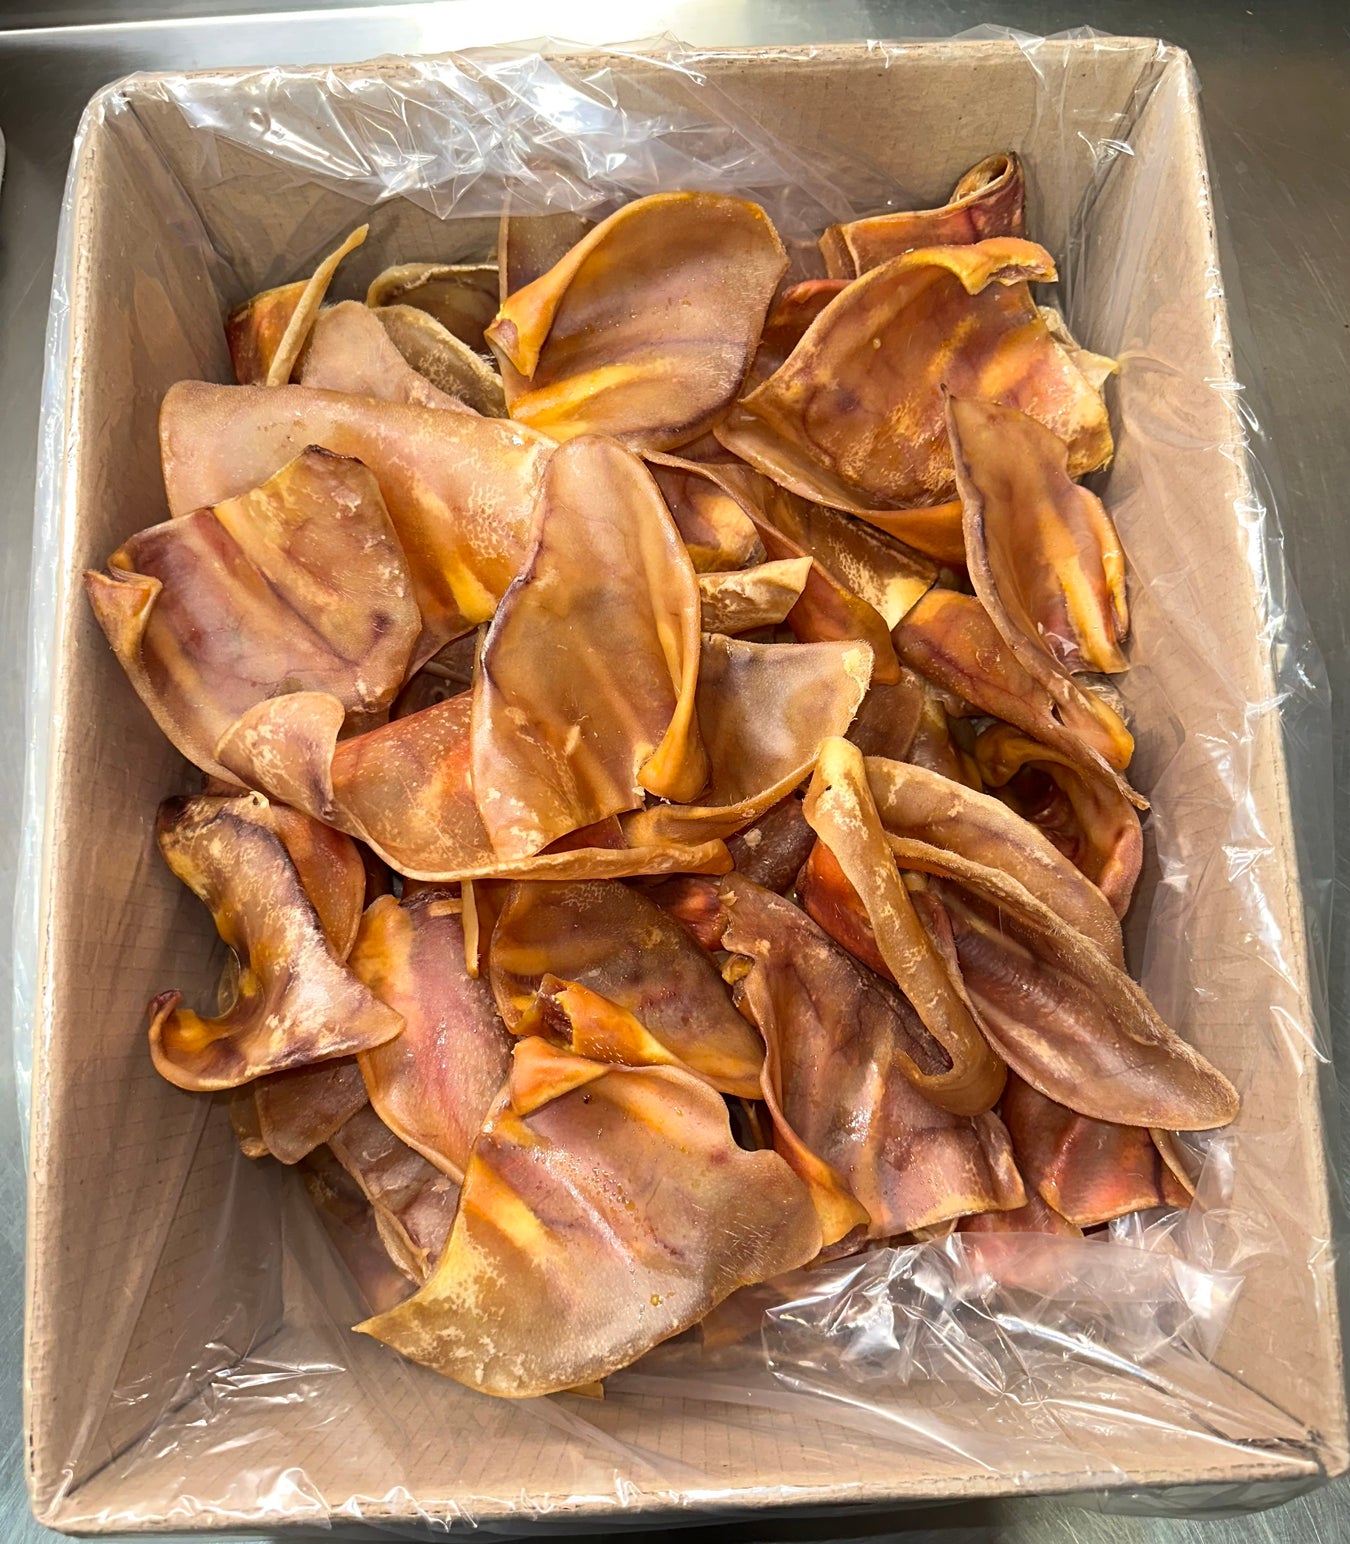 Sancho & Lola's Safe, Delicious, Human-Grade, Hand-Picked Pig Ears